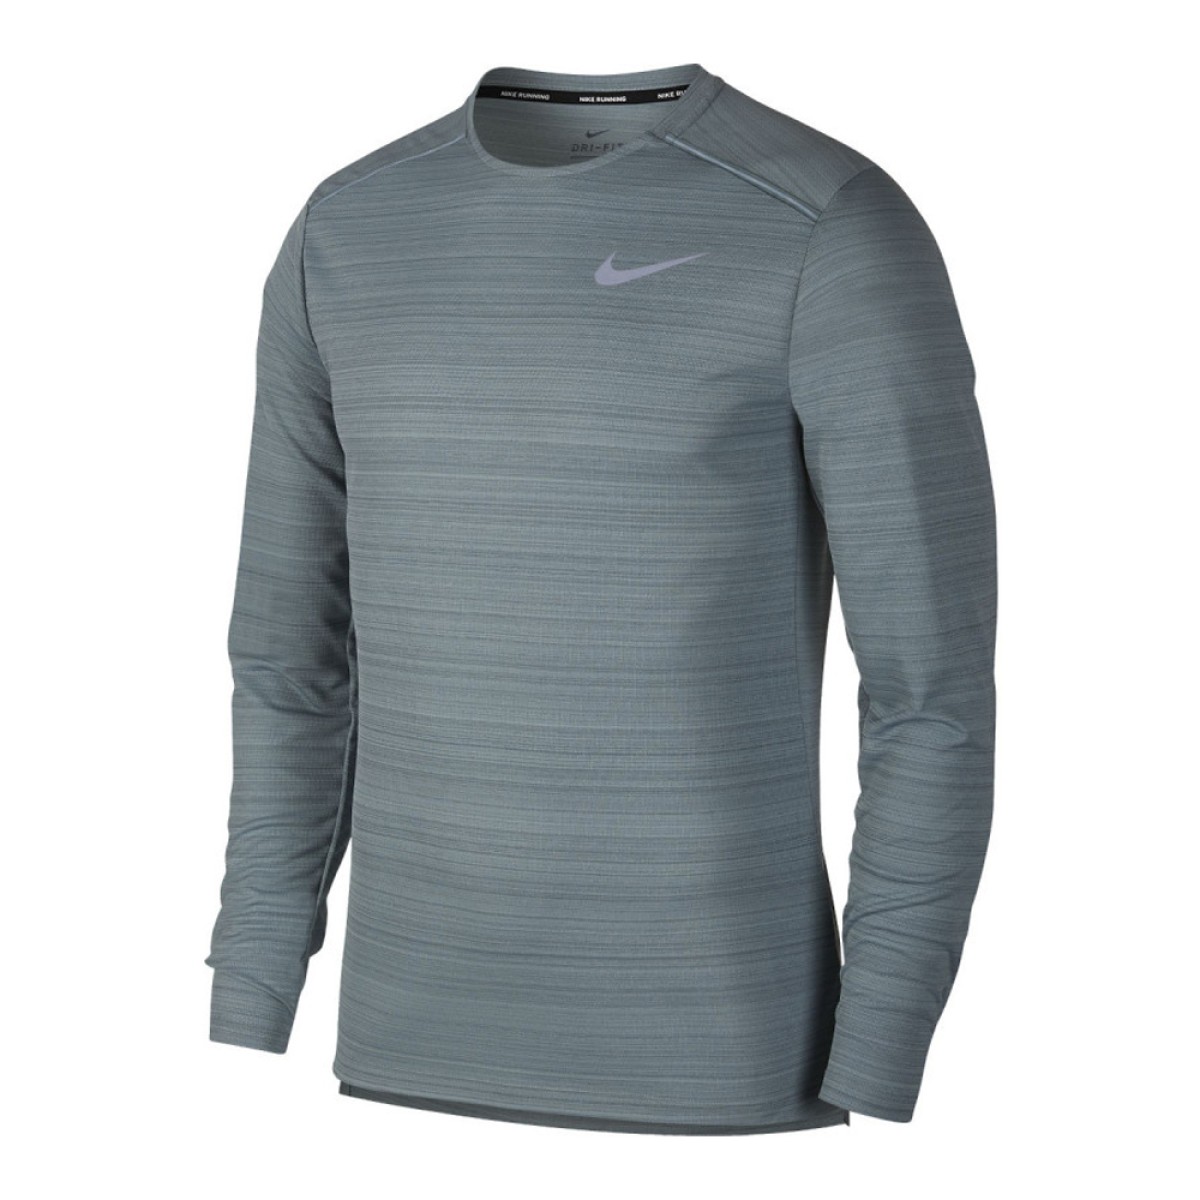 Layer up in the Nike Dri-FIT Miler Men's Long-Sleeve Running Top. Sweat-wicking, breathable 